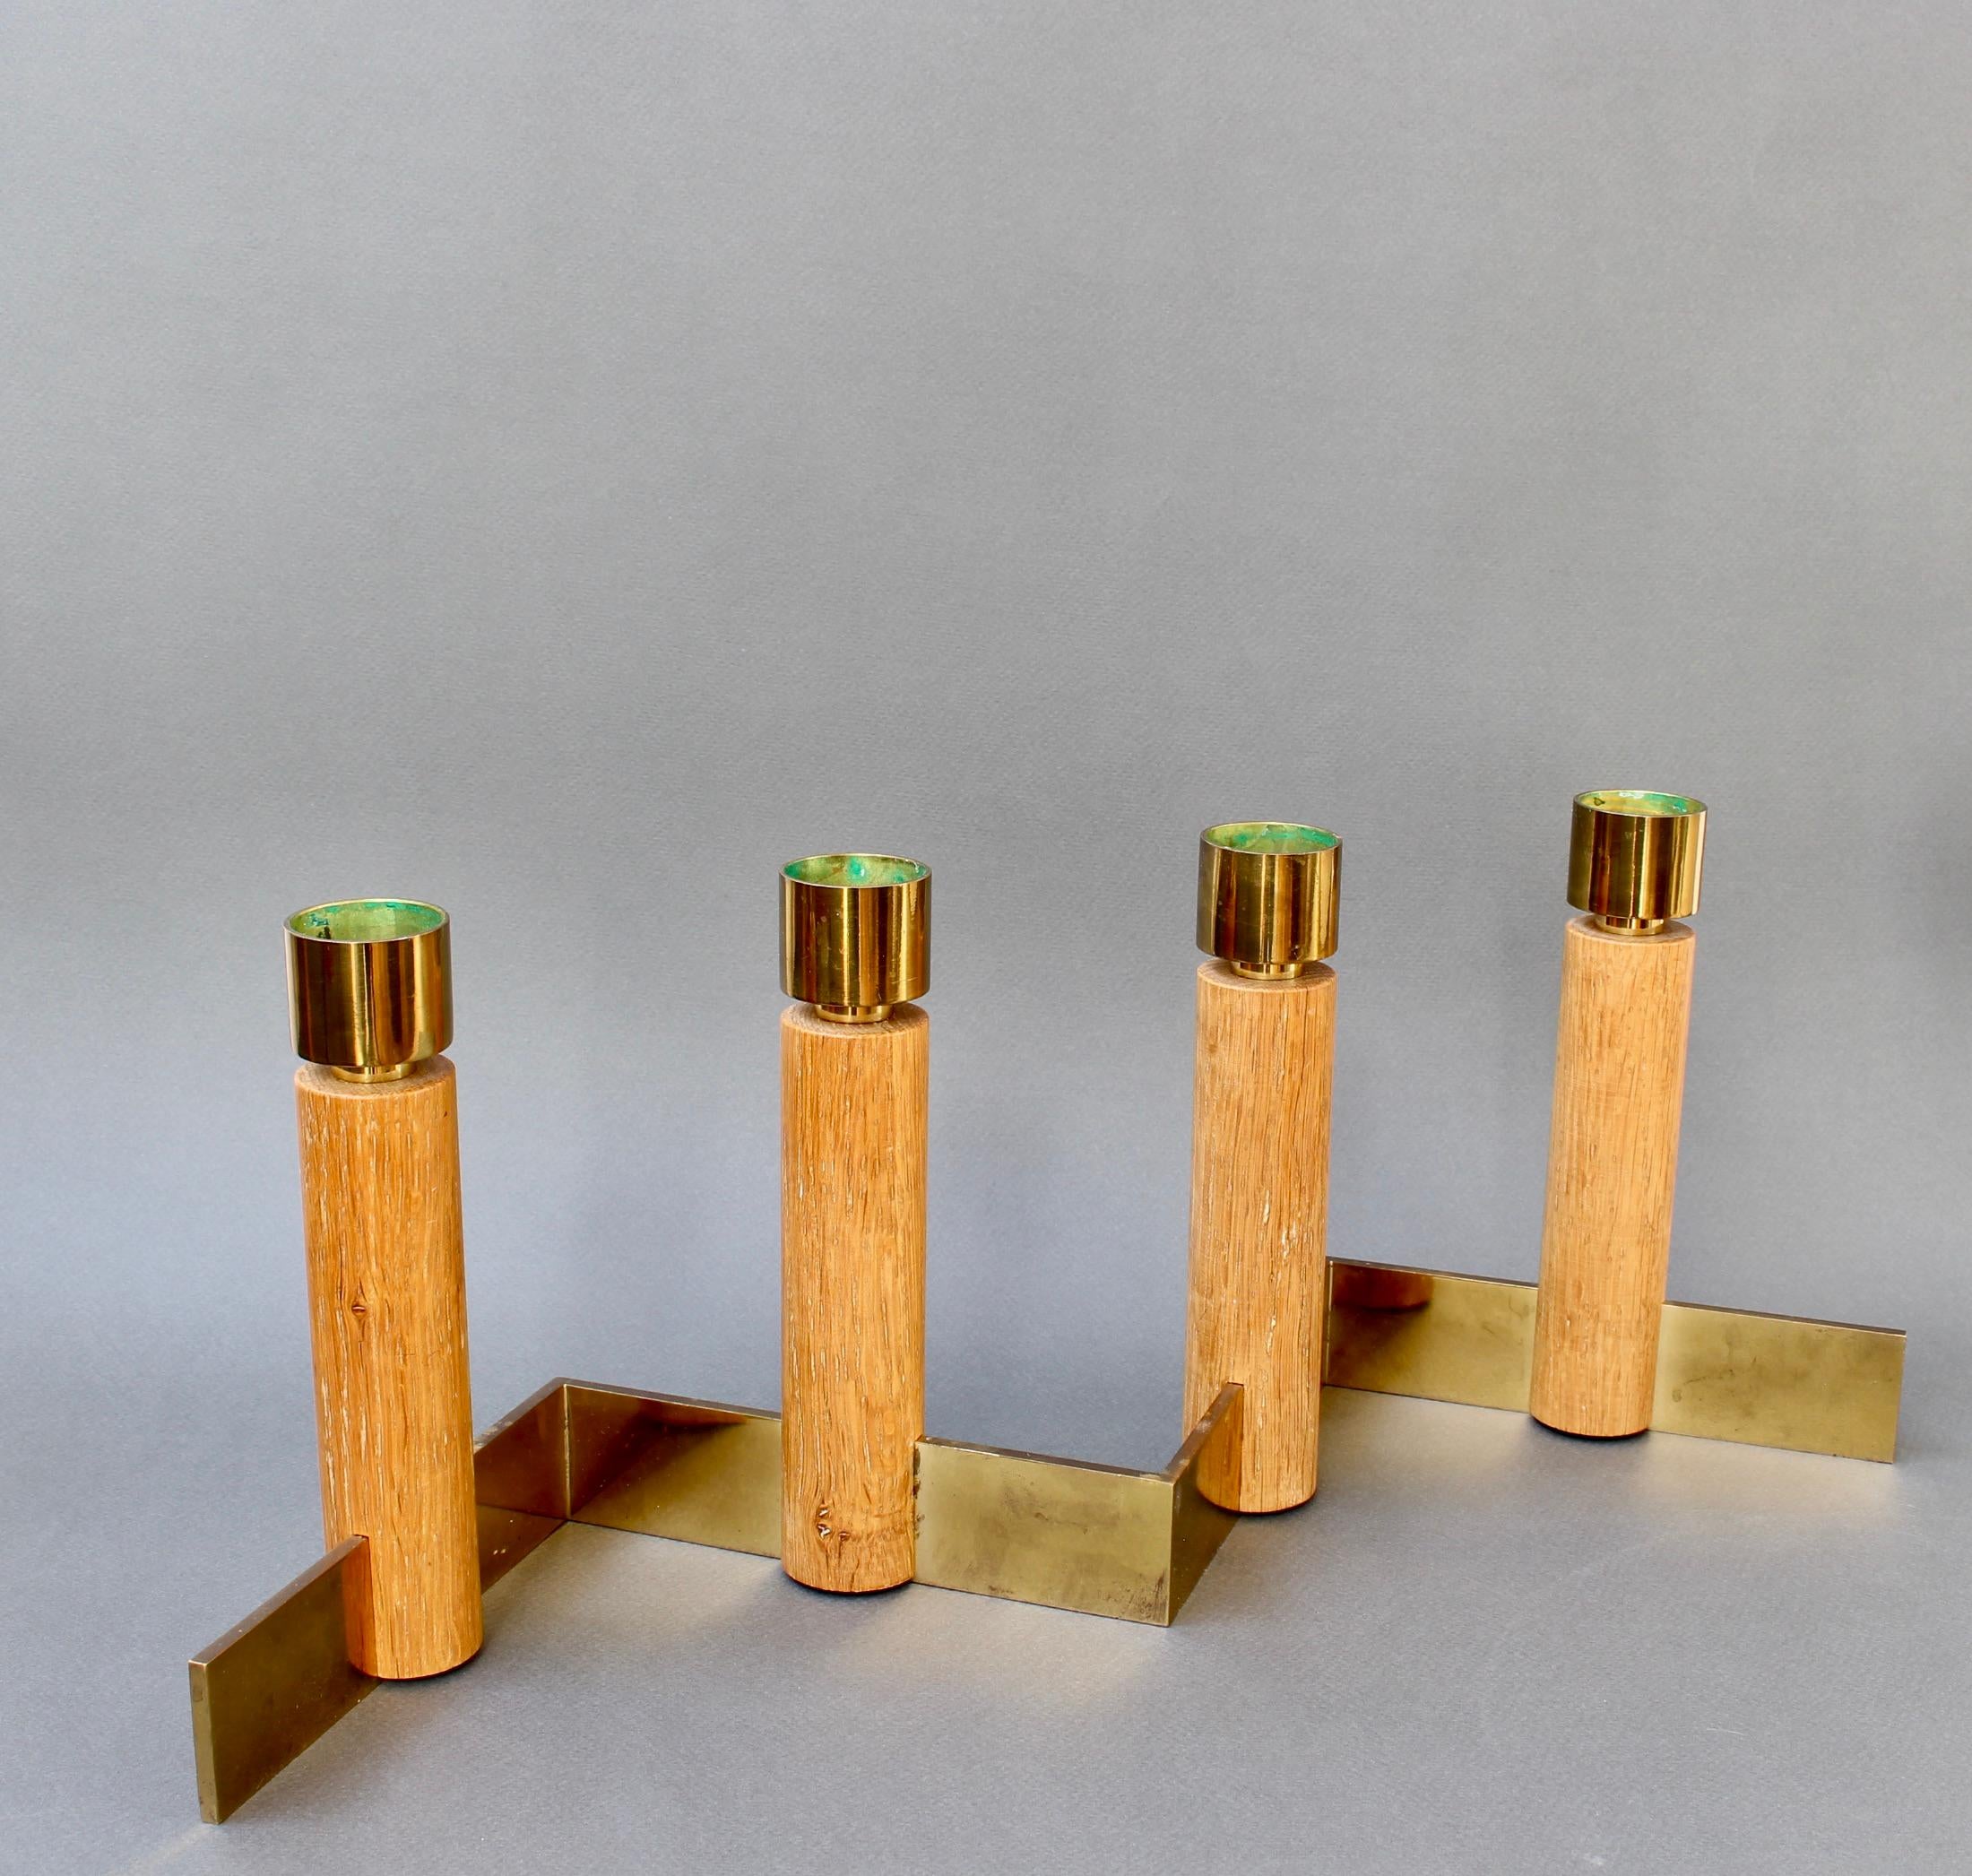 Mid-century candlestick holder by Hans Agne Jakobsson (circa 1950s). Brass base supports four wooden candlesticks topped by wide-candle brass receptacles. The well known designer was a master of light in all its forms. In fair overall condition with